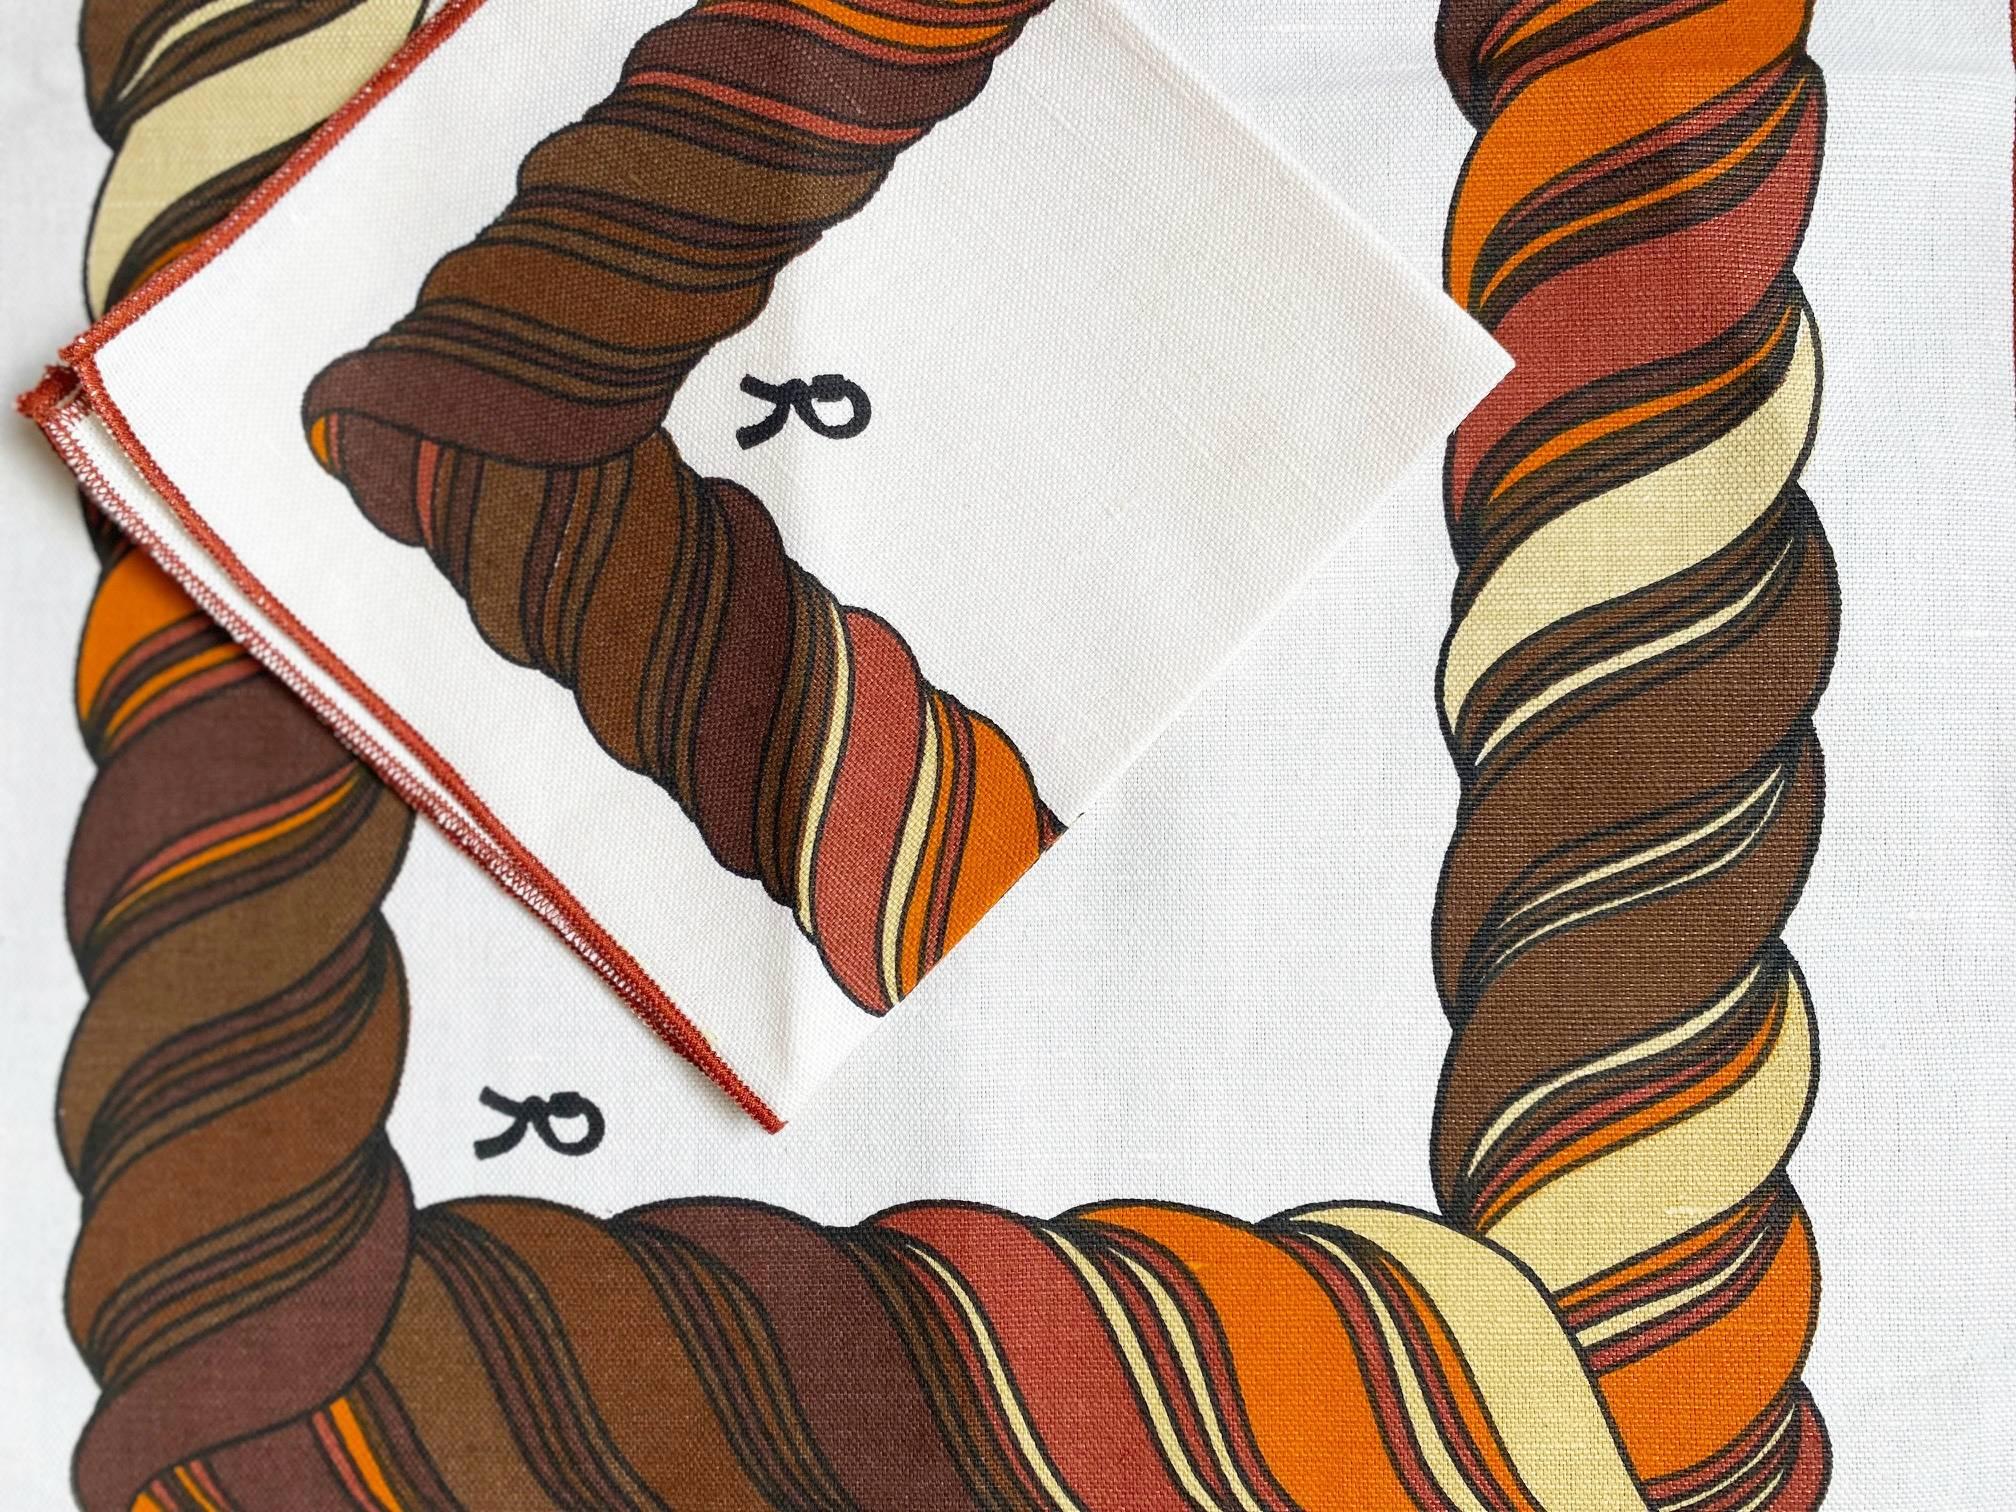 Roberta di Camerino print linen placemat set of 2, brown/orange/white design, the set comes with 2 matching napkins, Made in Italy, crafted from premium materials, this set is designed to last and is sure to be a timeless addition to your dining